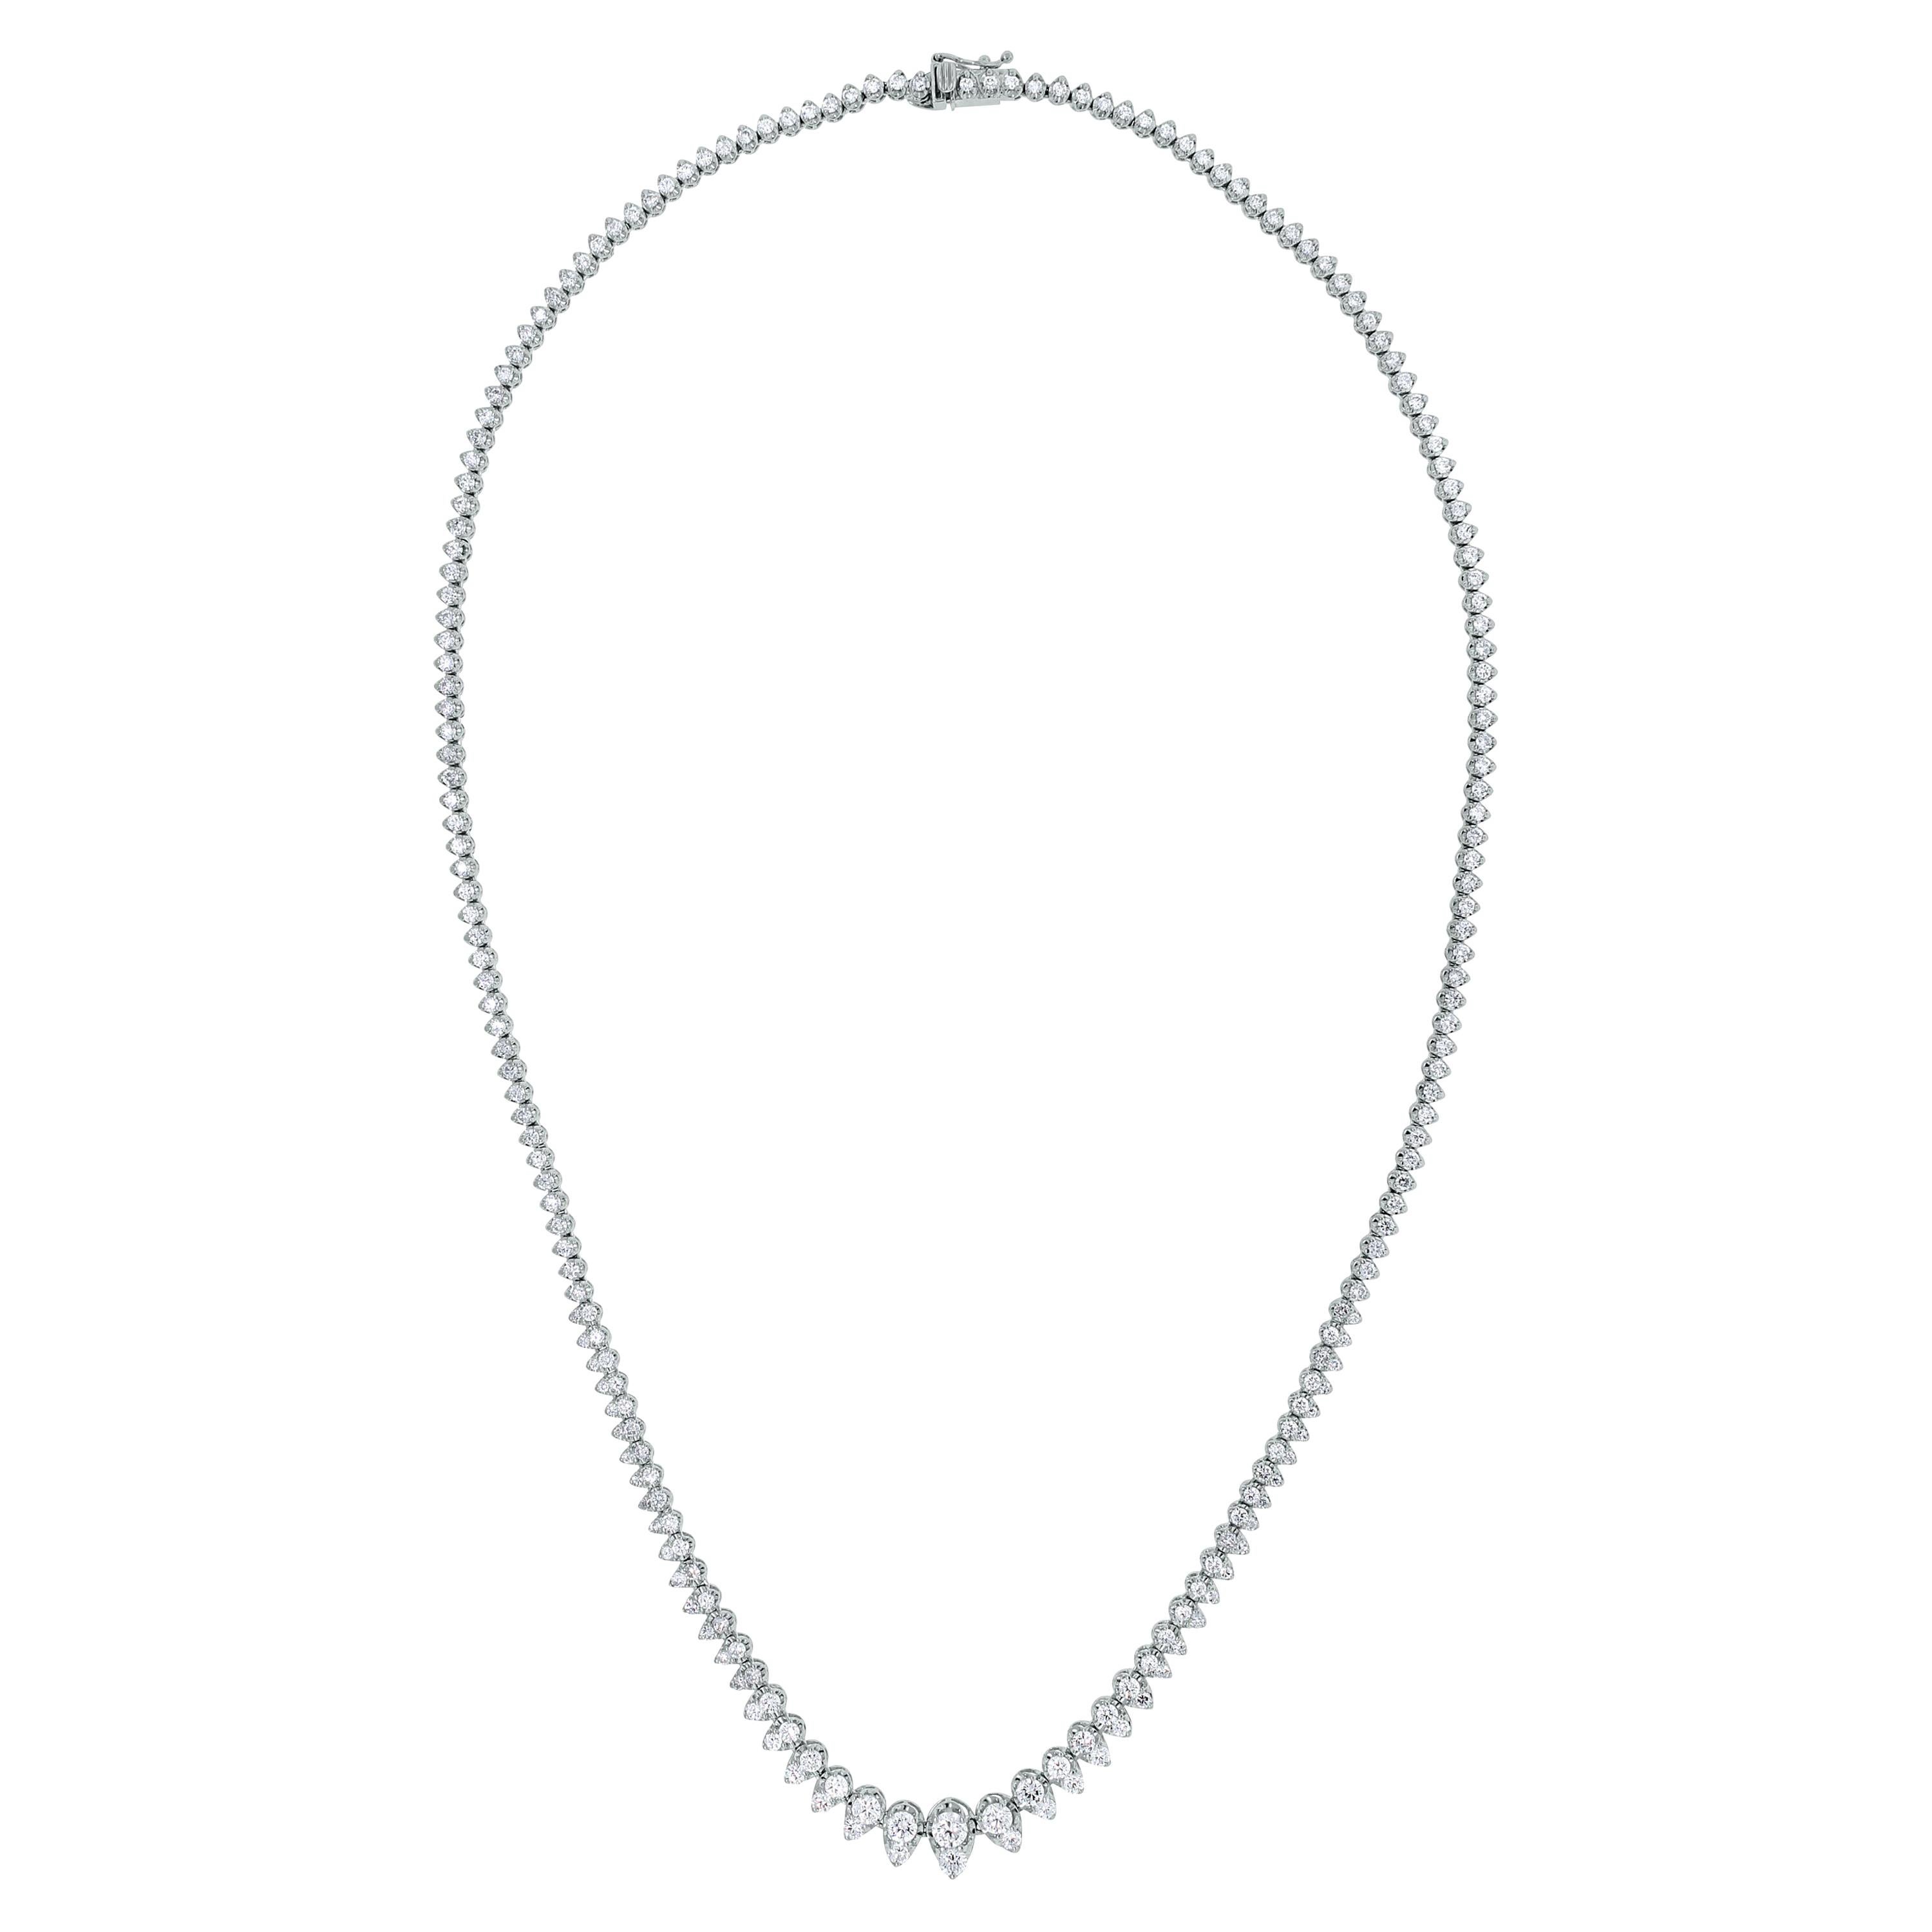 Beauvince Graduated Diamonds Pears Tennis Necklace in White Gold